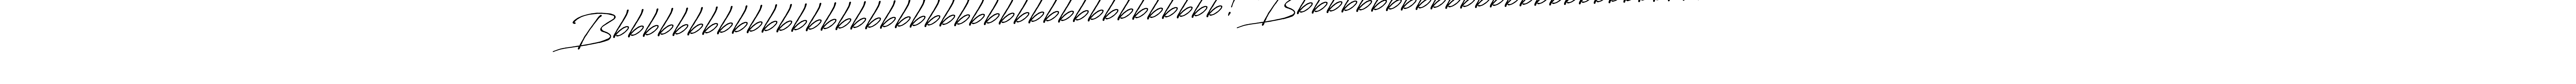 The best way (Antro_Vectra_Bolder) to make a short signature is to pick only two or three words in your name. The name Bbbbbbbbbbbbbbbbbbbbbbbbbbbbbbbbbbbbbbbbbb! Bbbbbbbbbbbbbbbbbbbbbbbbbbbbbbbbbbbbbbbbbbbbbbbb include a total of six letters. For converting this name. Bbbbbbbbbbbbbbbbbbbbbbbbbbbbbbbbbbbbbbbbbb! Bbbbbbbbbbbbbbbbbbbbbbbbbbbbbbbbbbbbbbbbbbbbbbbb signature style 7 images and pictures png